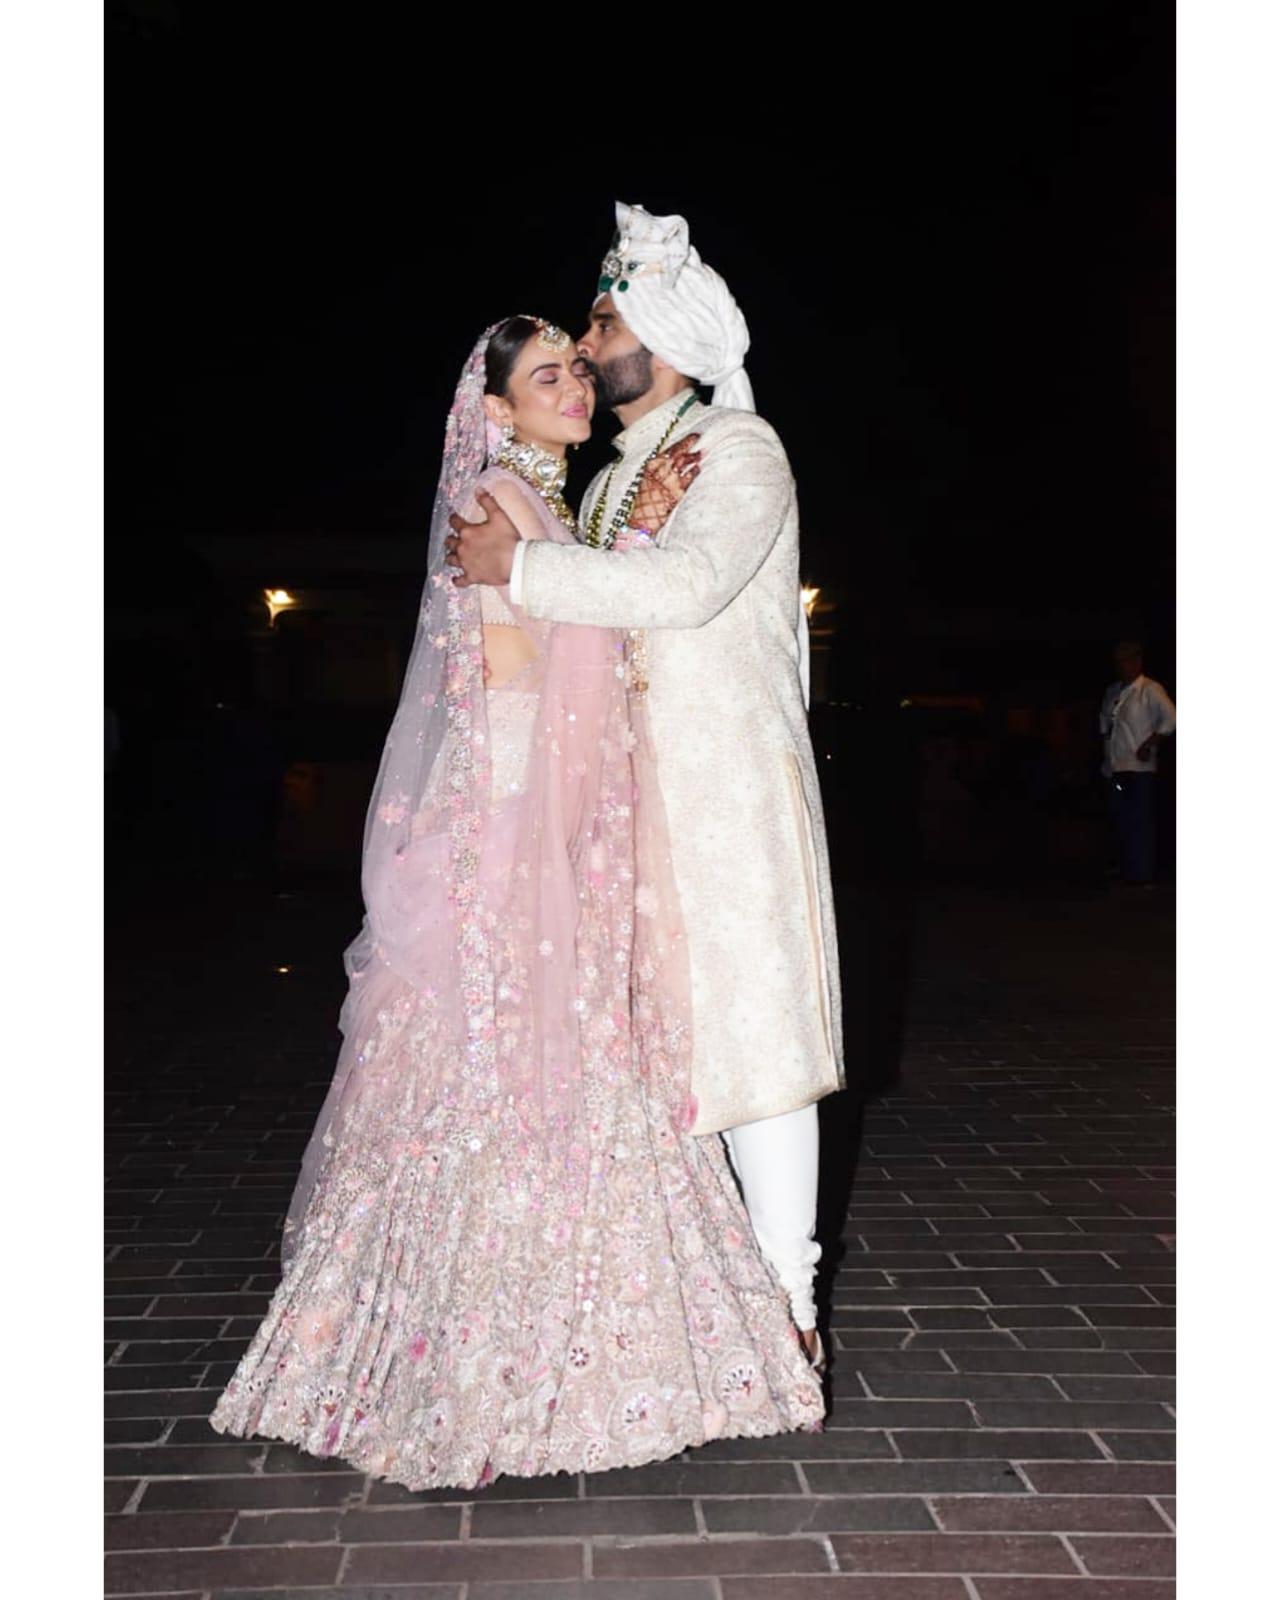 As the newlywed couple posed for the camera, Jackky Bhagnani planted a kiss on Rakul's forehead and it is all things love